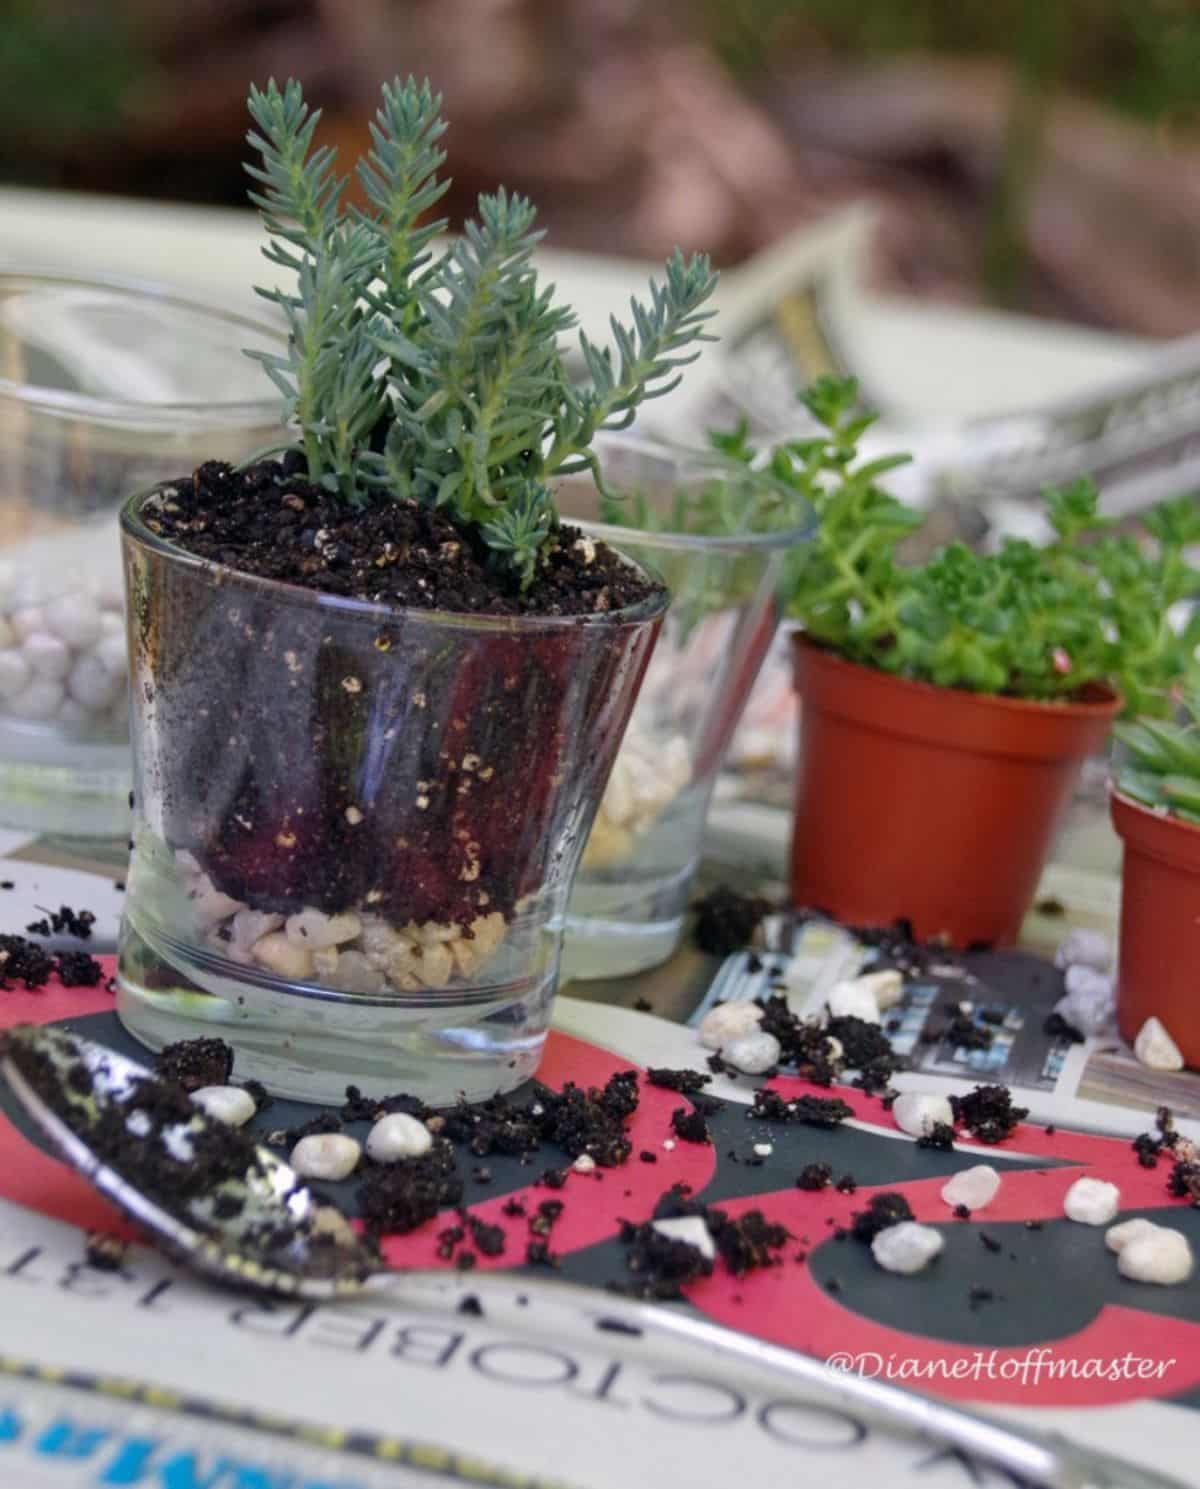 Upcycling Jars for a DIY Succulent Garden